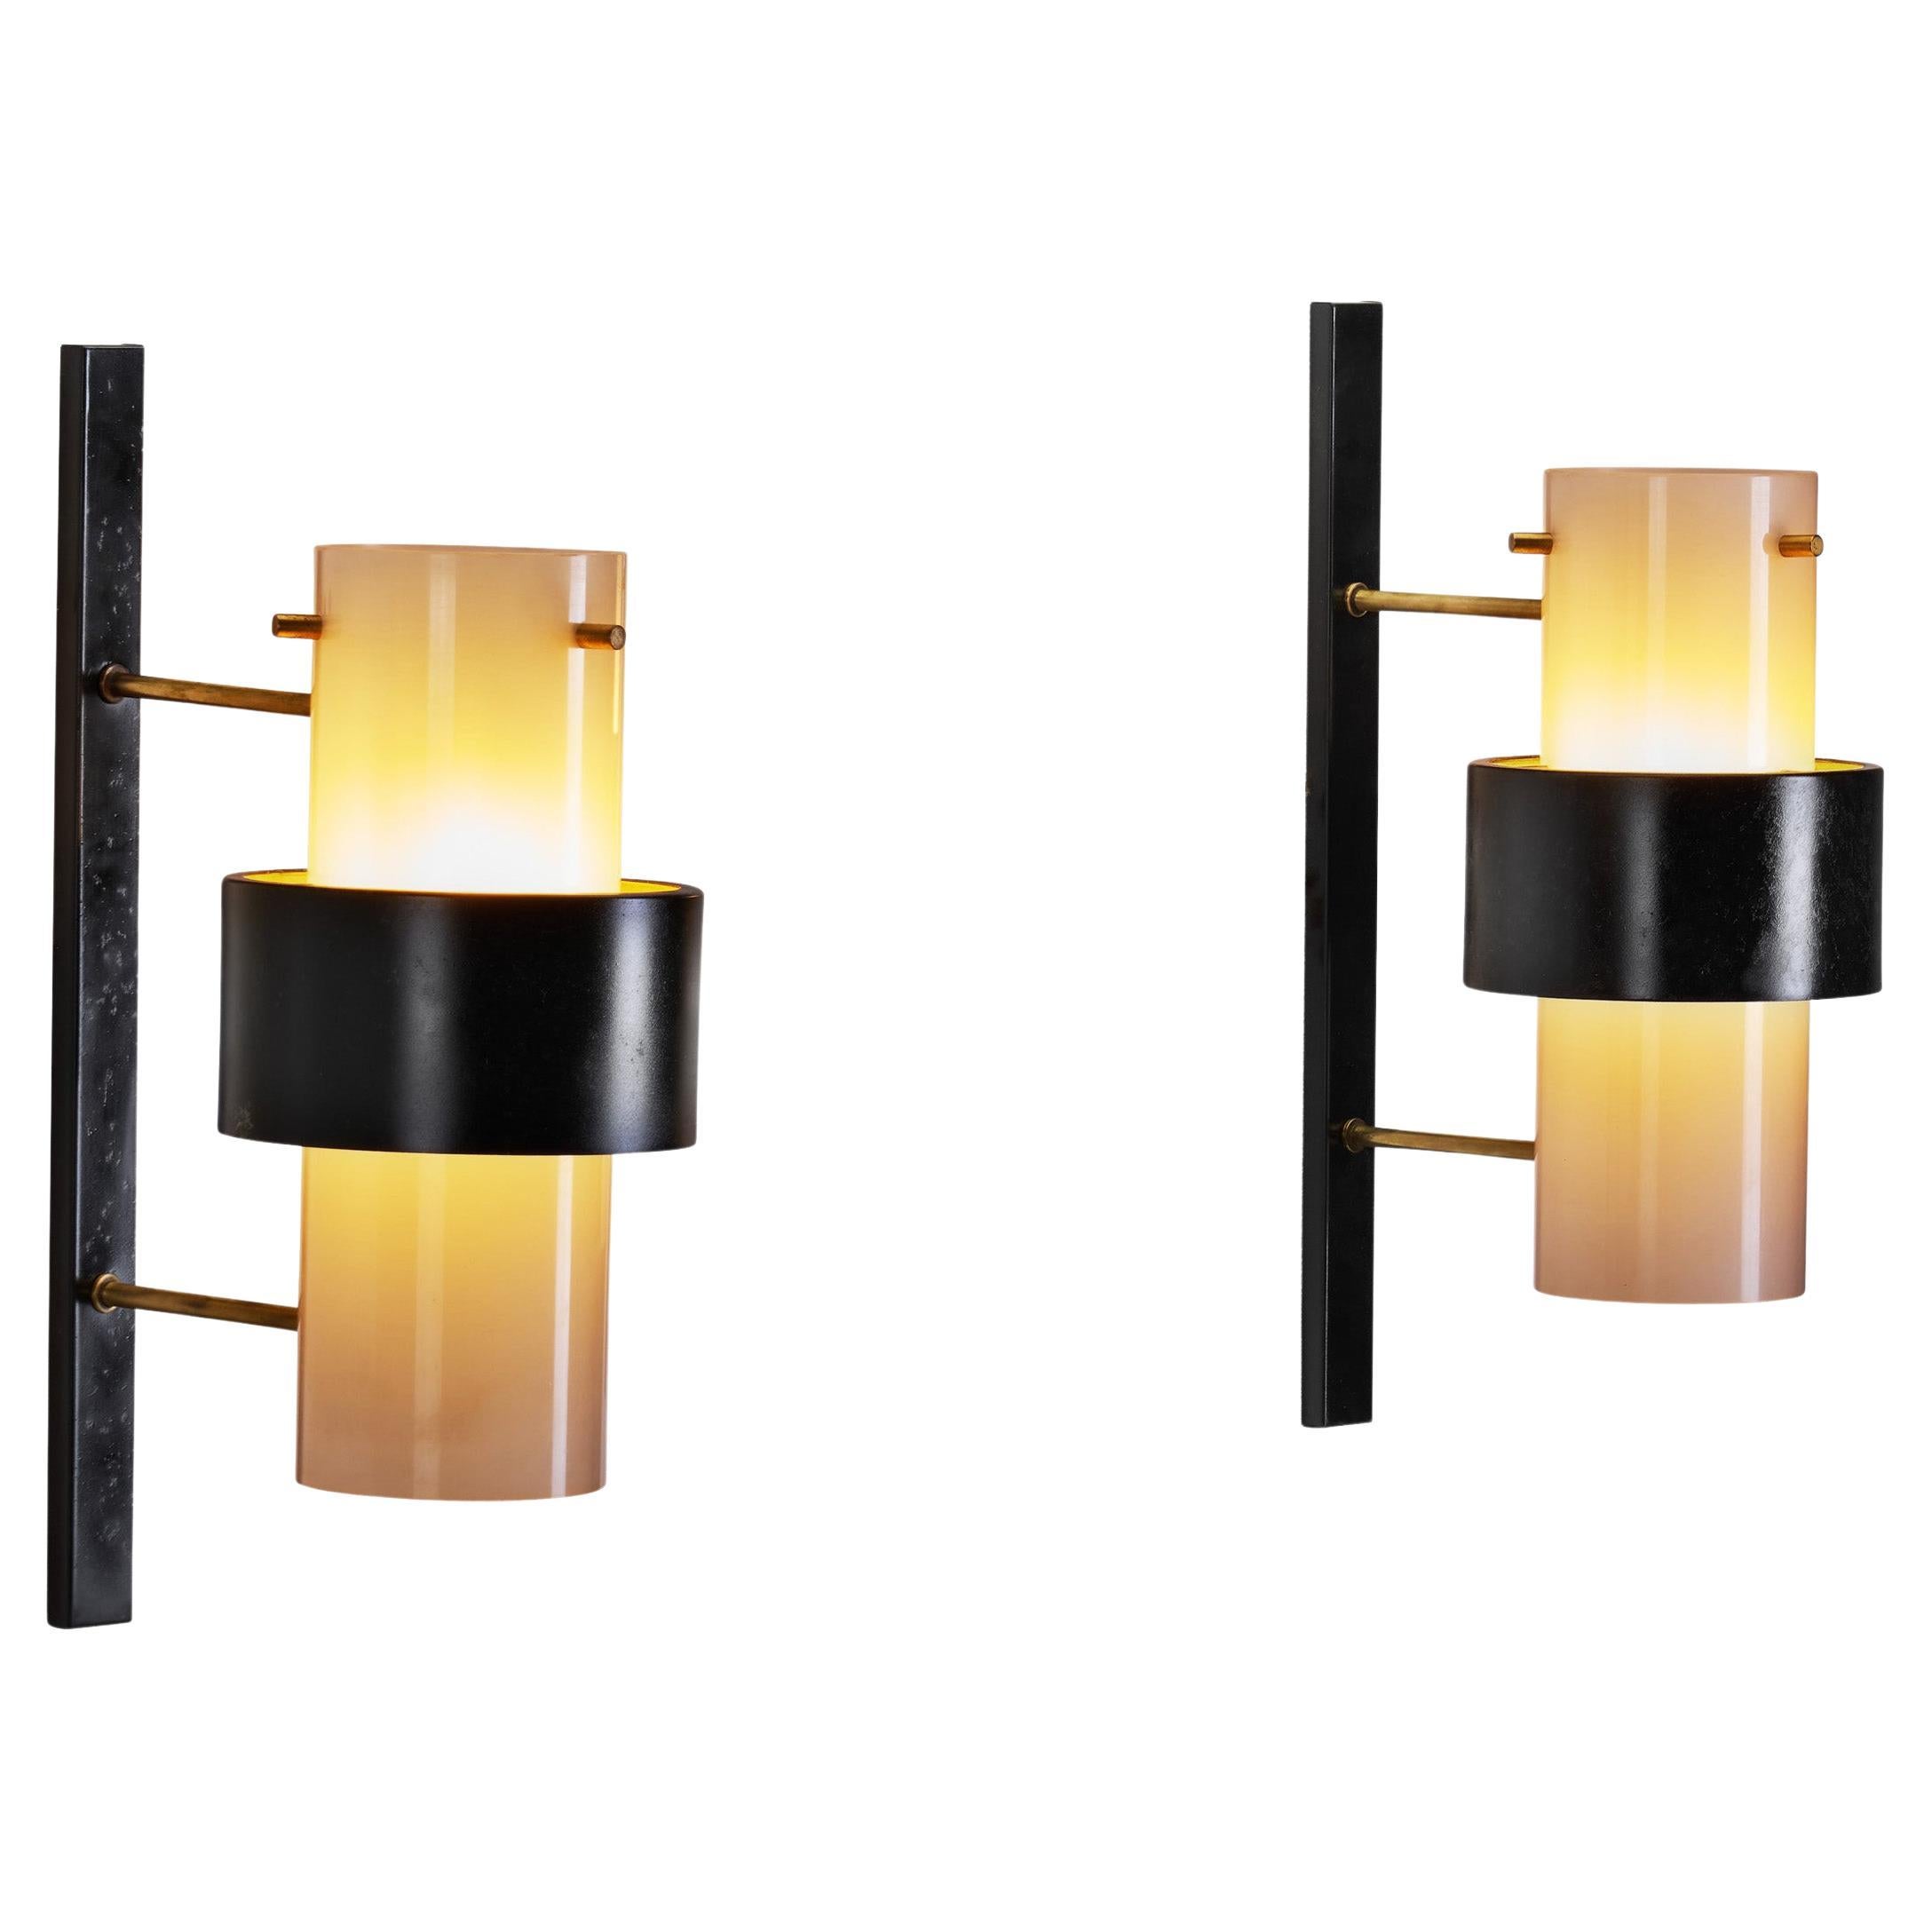 Pair of Acrylic Glass Wall Sconces by Maison Lunel, France 1950s For Sale